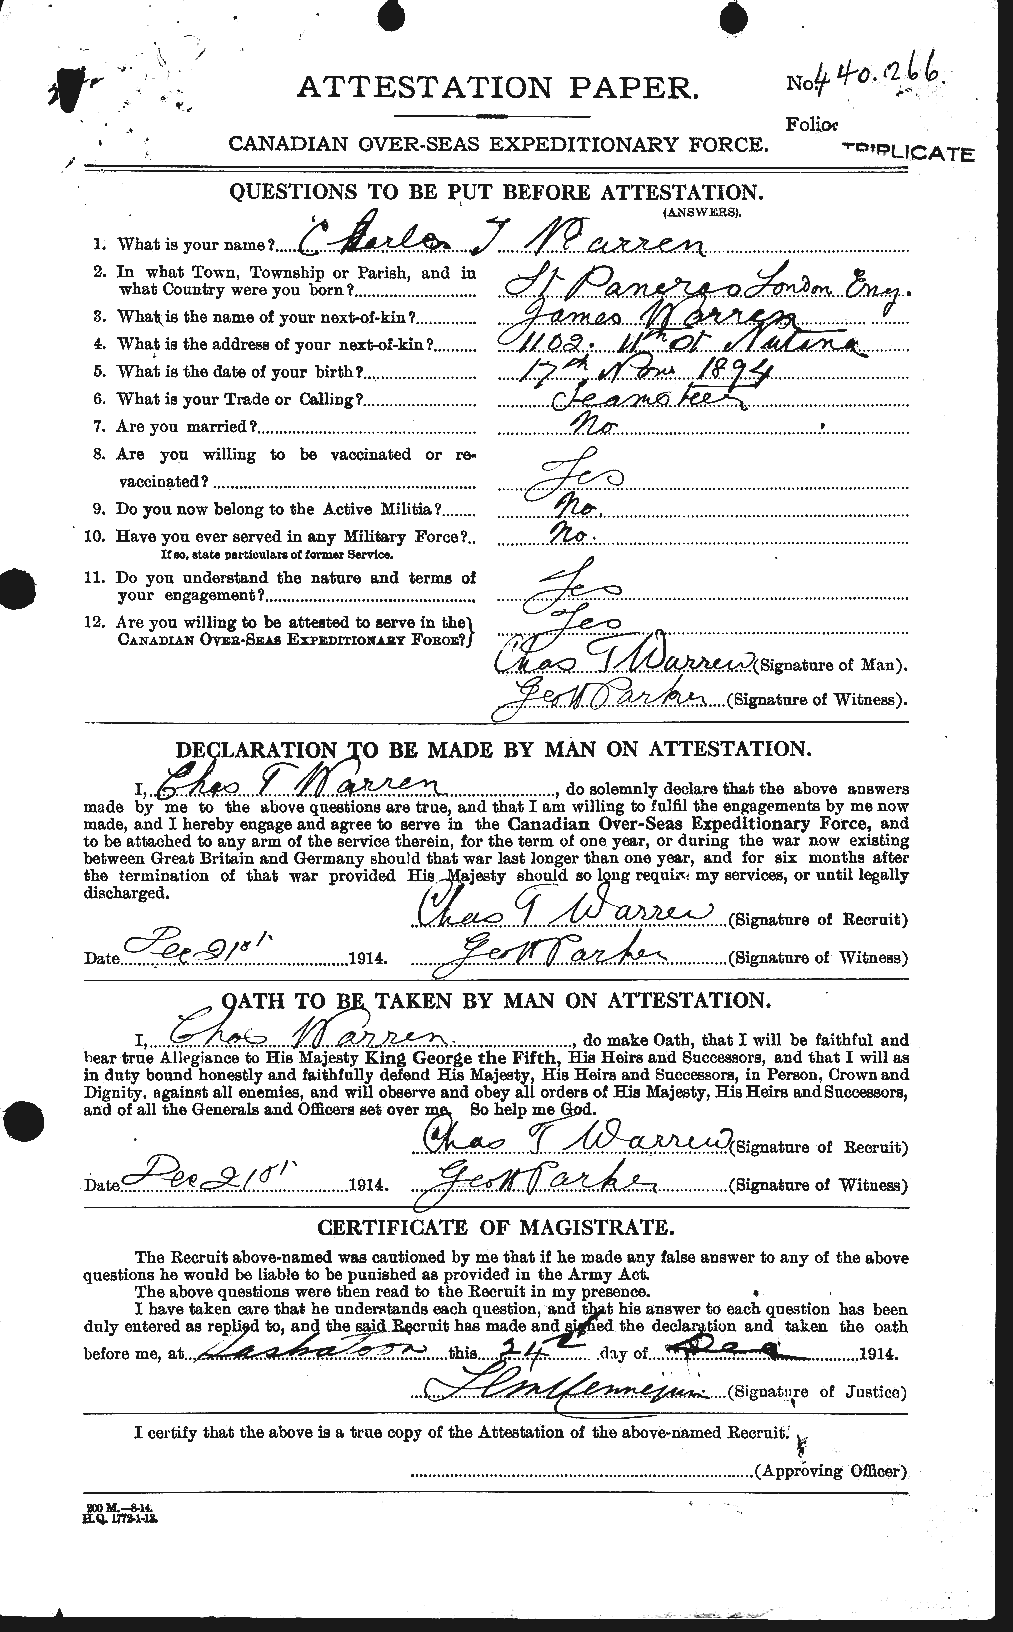 Personnel Records of the First World War - CEF 658391a